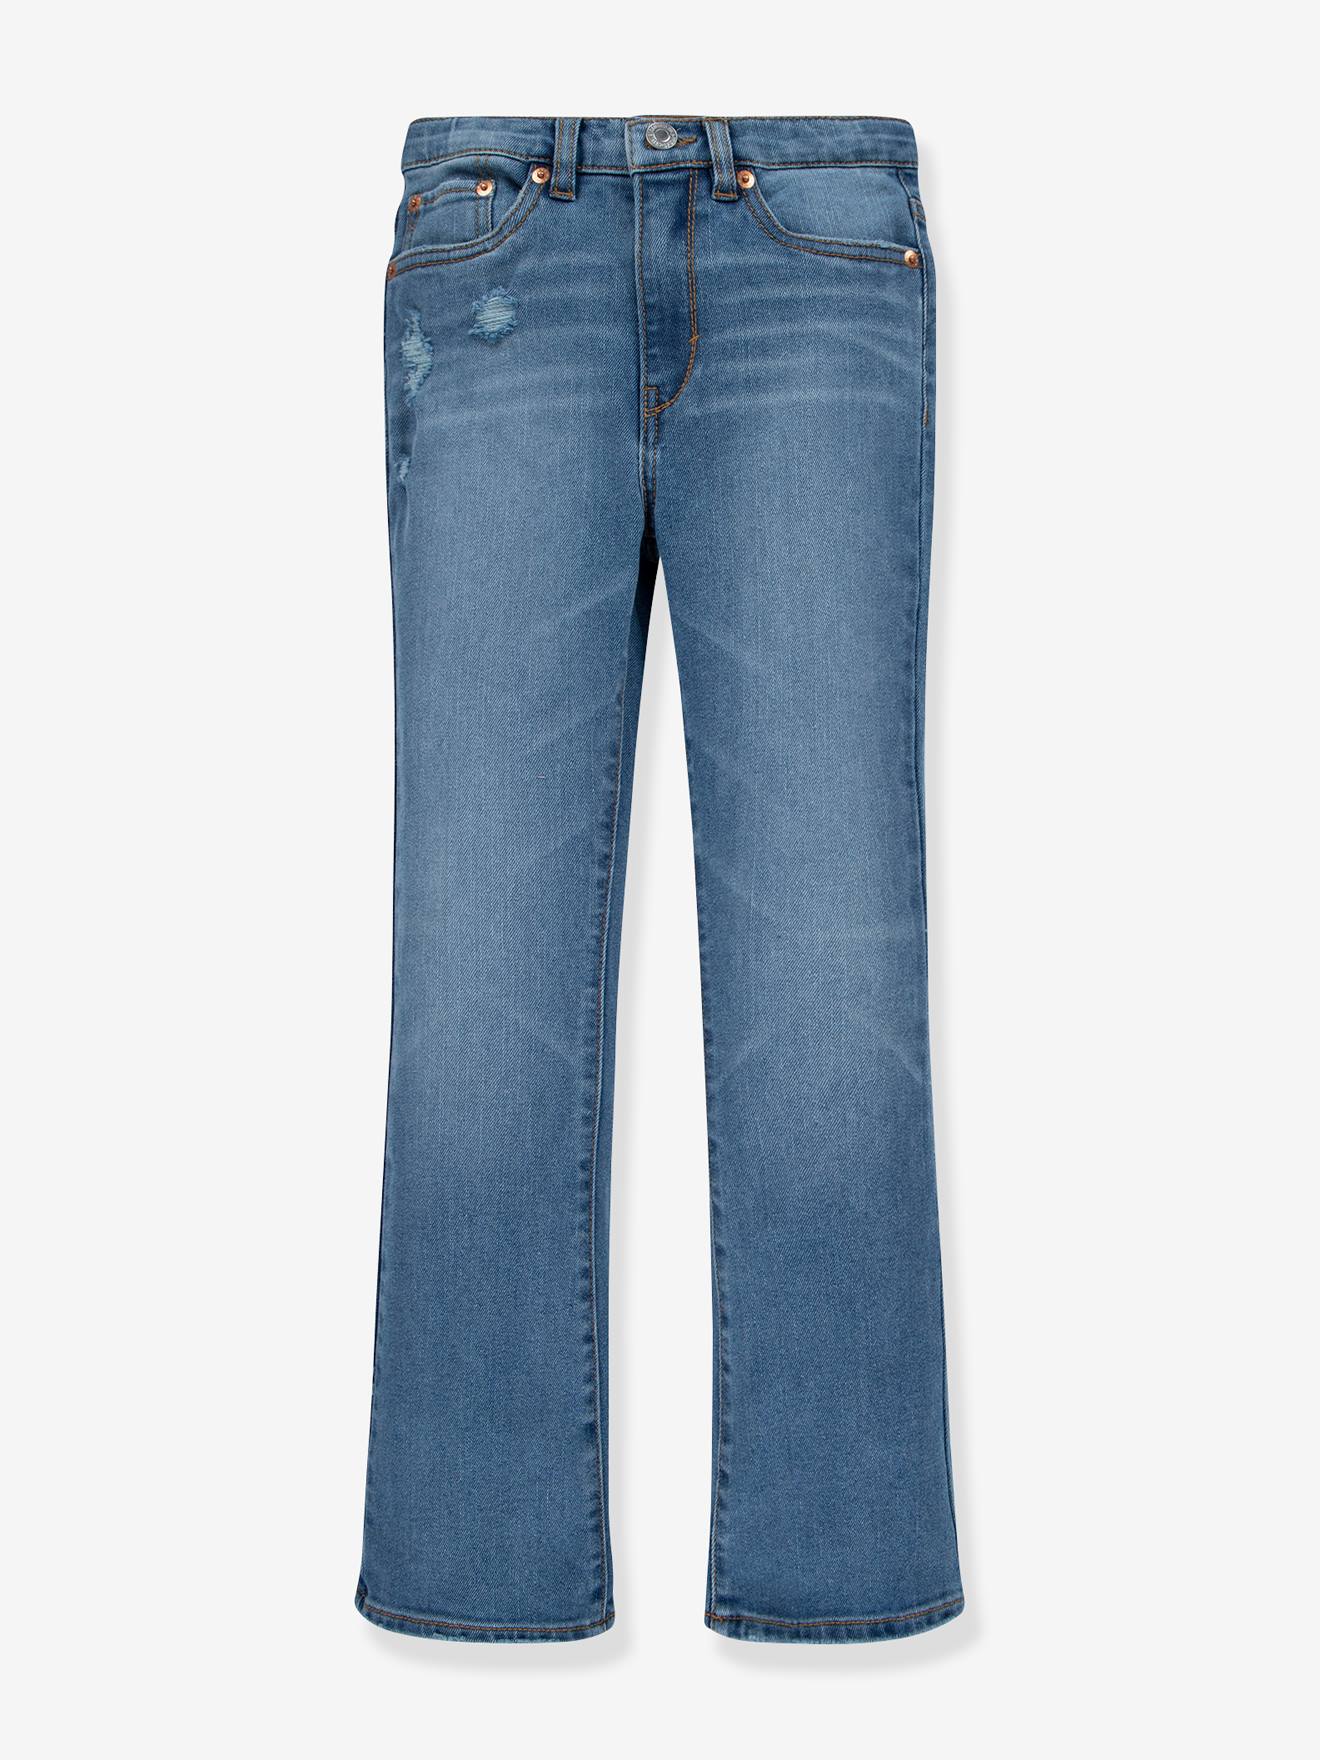 Flared Jeans by Levi’s(r) for Girls stone